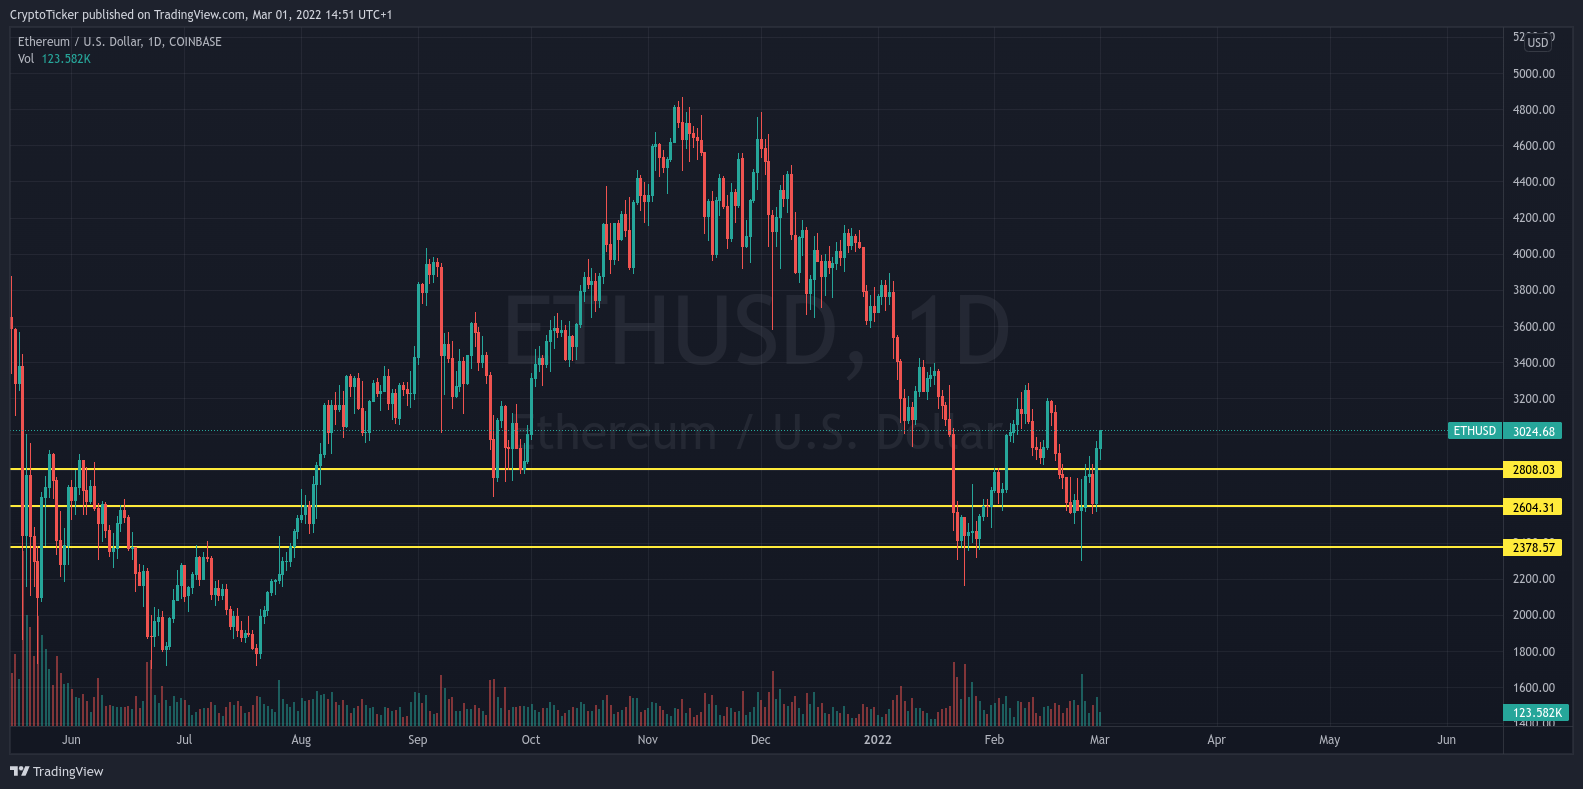 ETH/USD 1-day chart showing the important areas of ETH